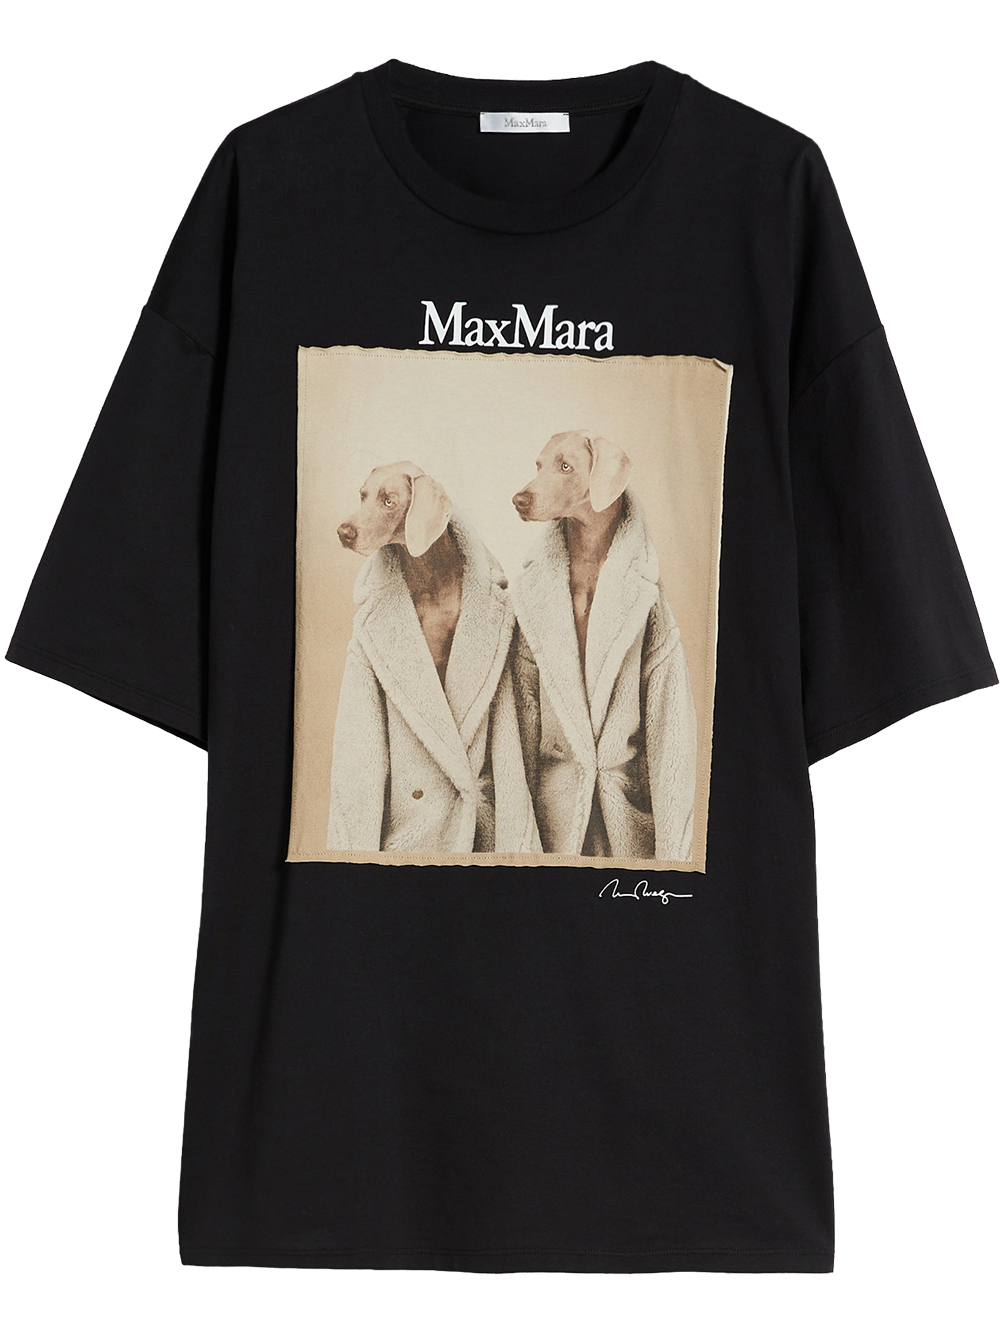 Max Mara Tacco Dog T-Shirt | Luxury and style at your fingertips